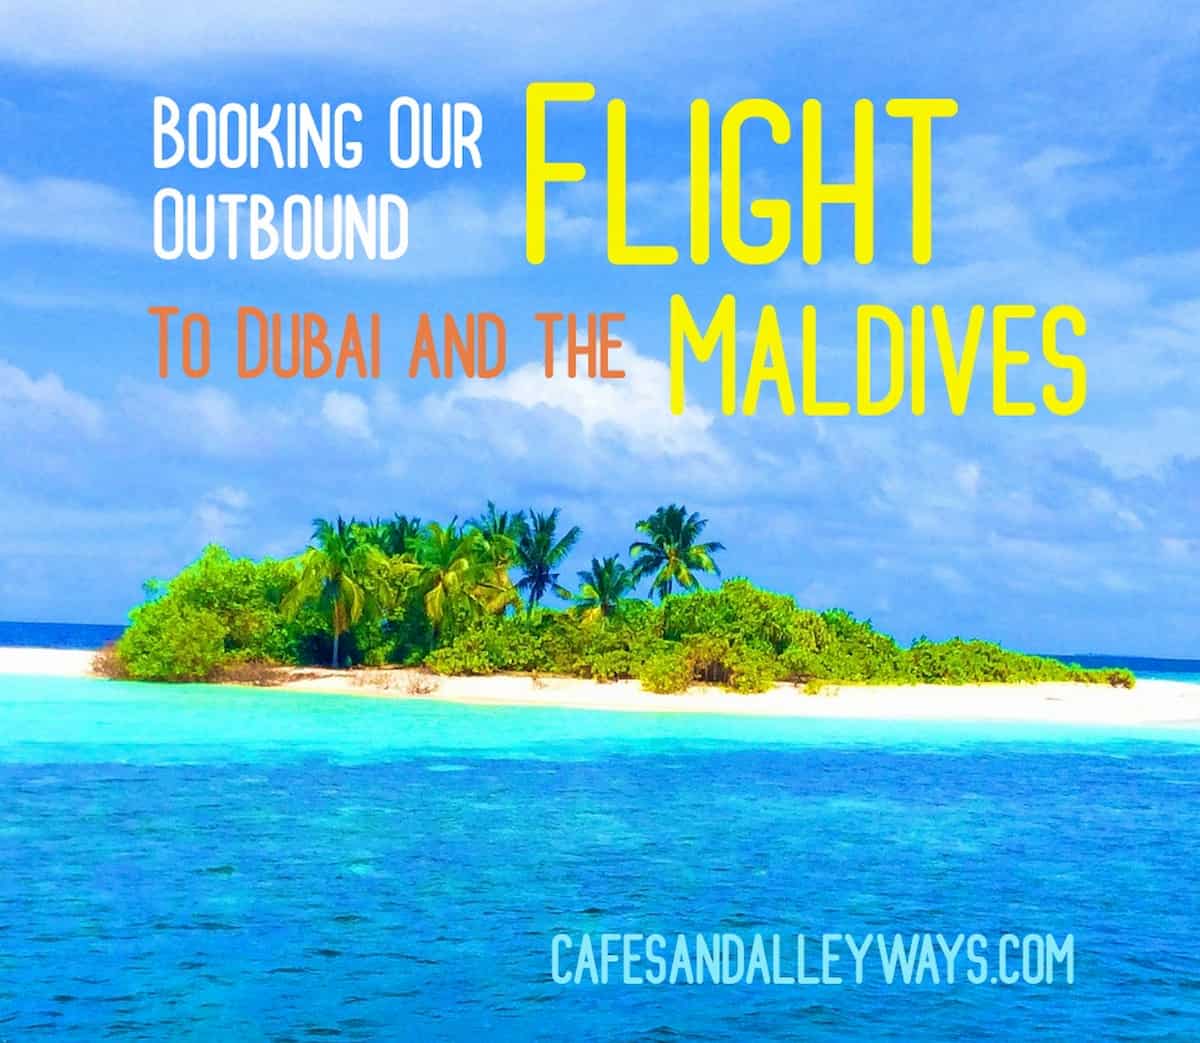 Booking Our Outbound Flight to Dubai and The Maldives